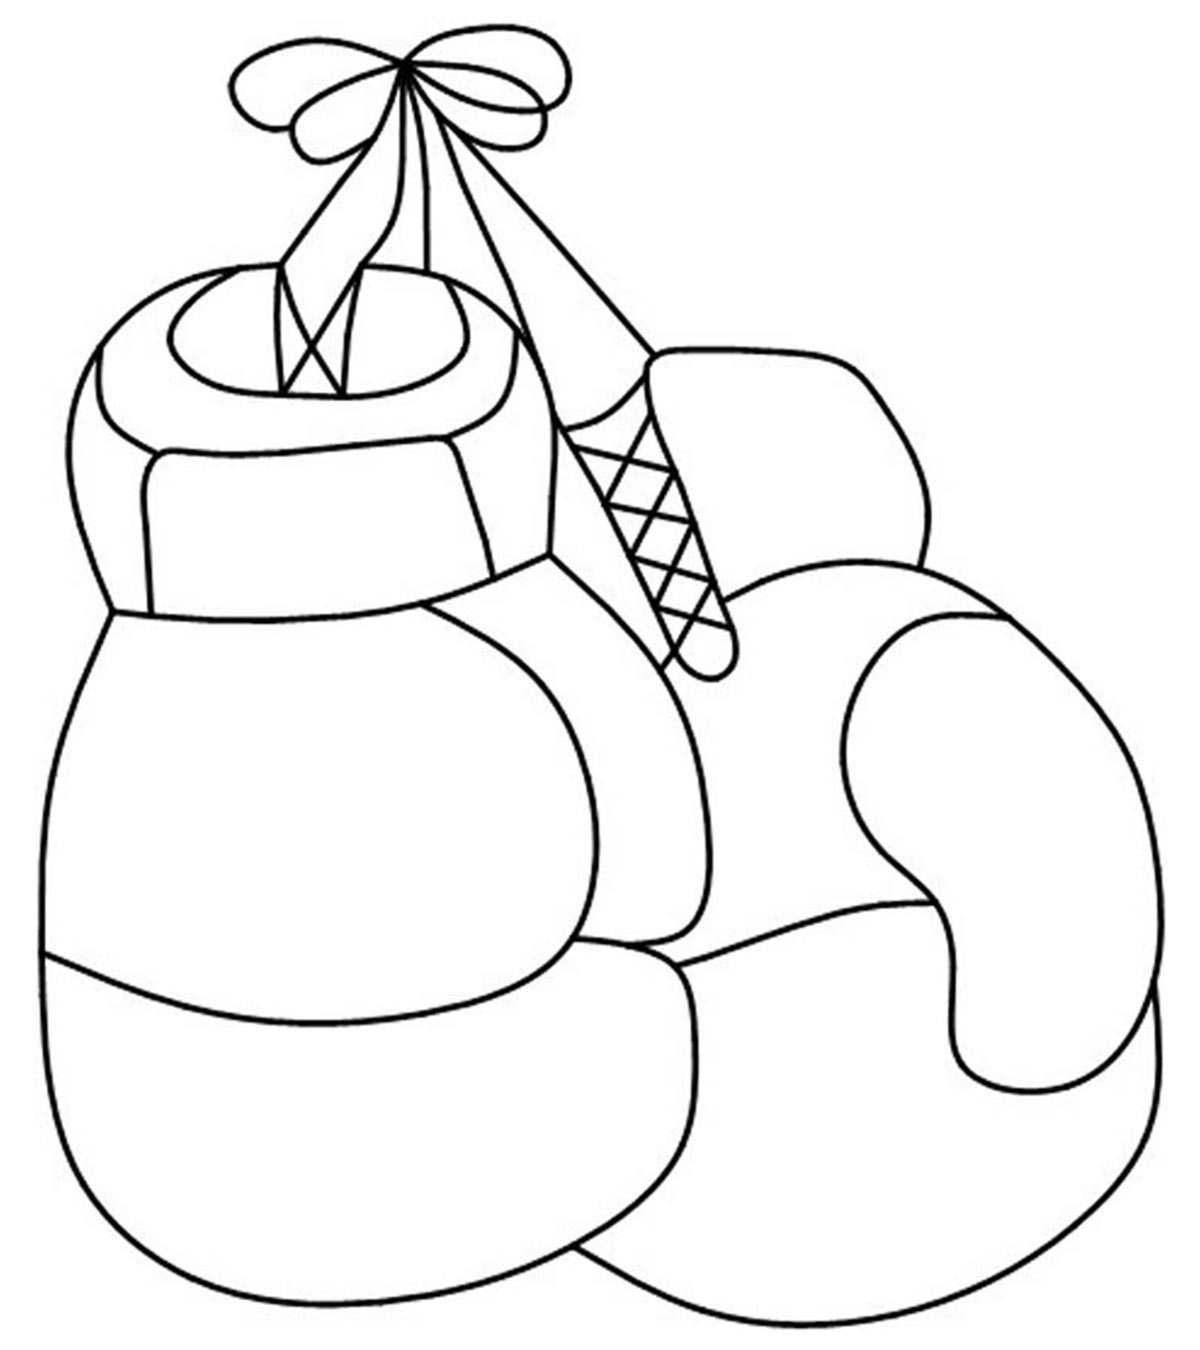 Sports Coloring Pages - MomJunction